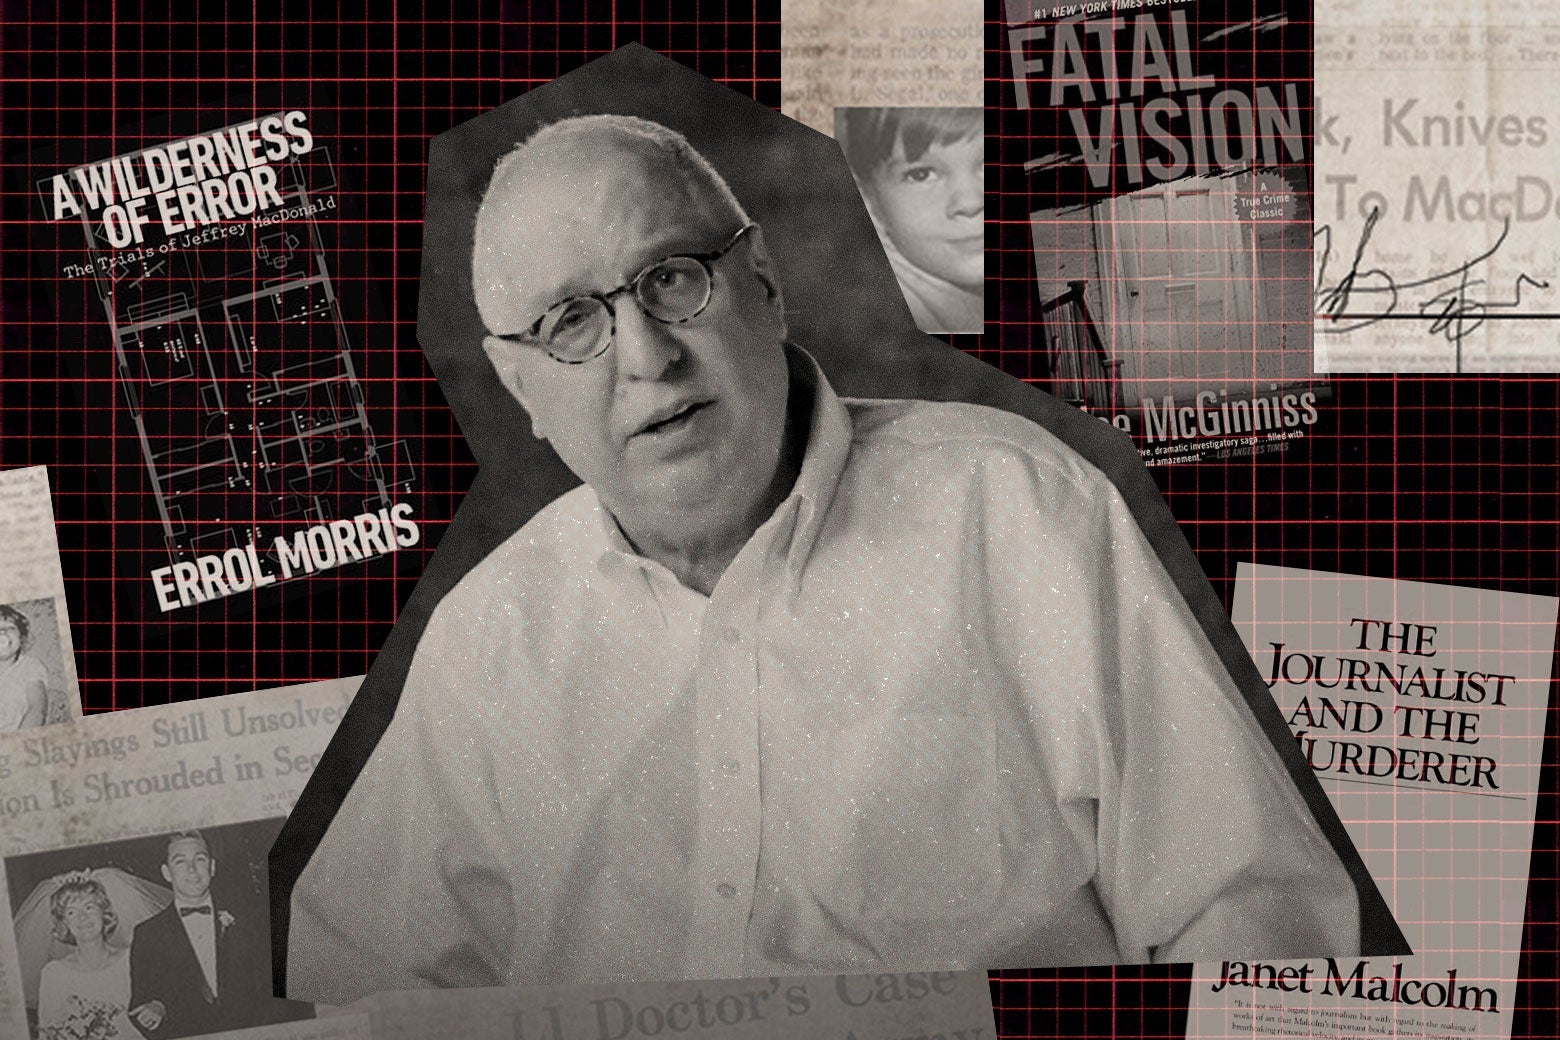 Errol Morris, surrounded by copies of A Wilderness of Error, Fatal Vision, and The Journalist and the Murderer, along with a newspaper and other photos and documents.